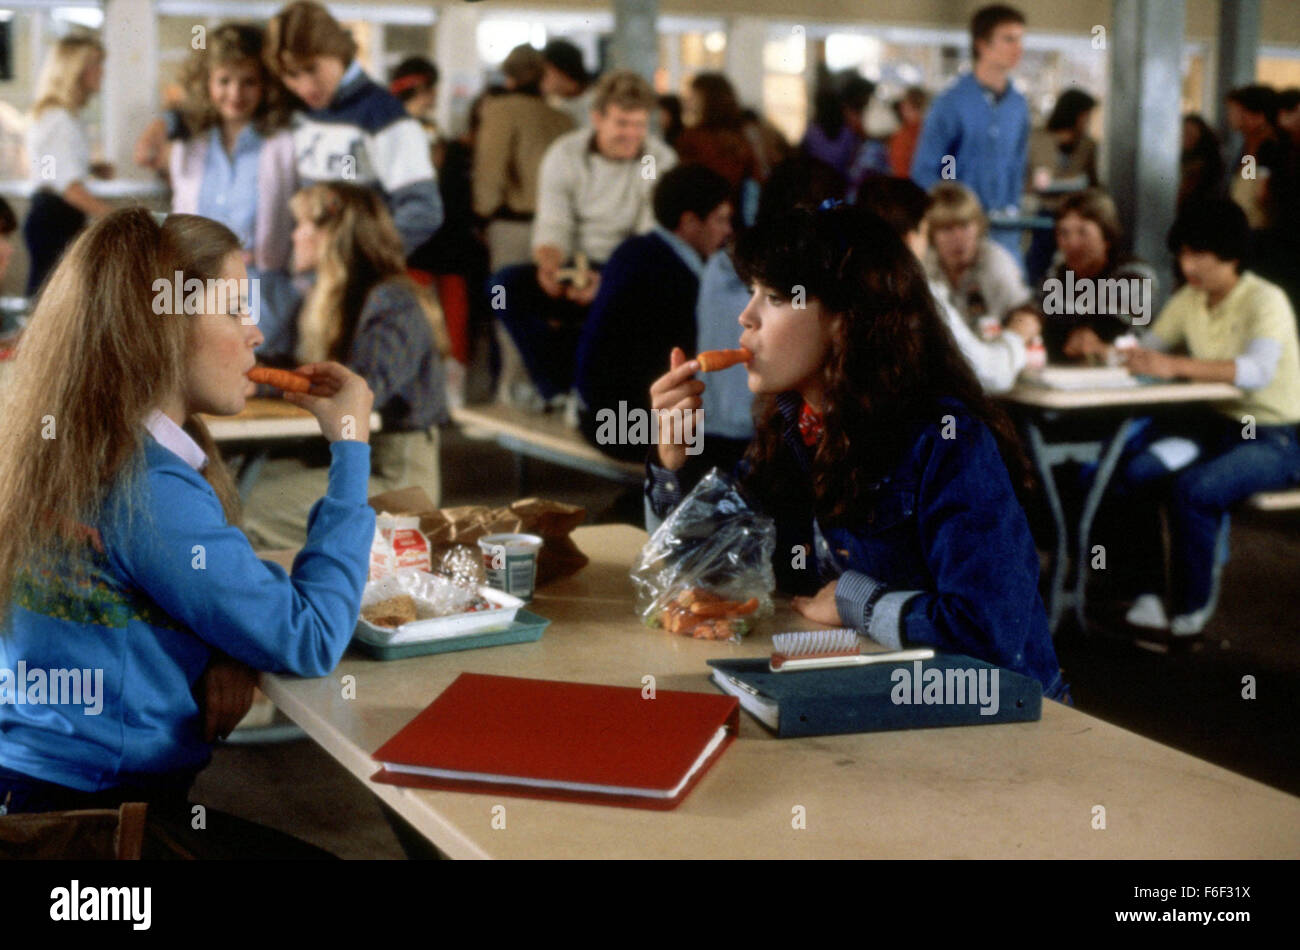 Aug 13, 1982; Los Angeles, CA, USA; JENNIFER JASON LEIGH and PHOEBE CATES star as Stacy Hamilton and Linda Barrett in the comedy 'Fast Times at Ridgemont High' directed by Amy Heckerling. Stock Photo